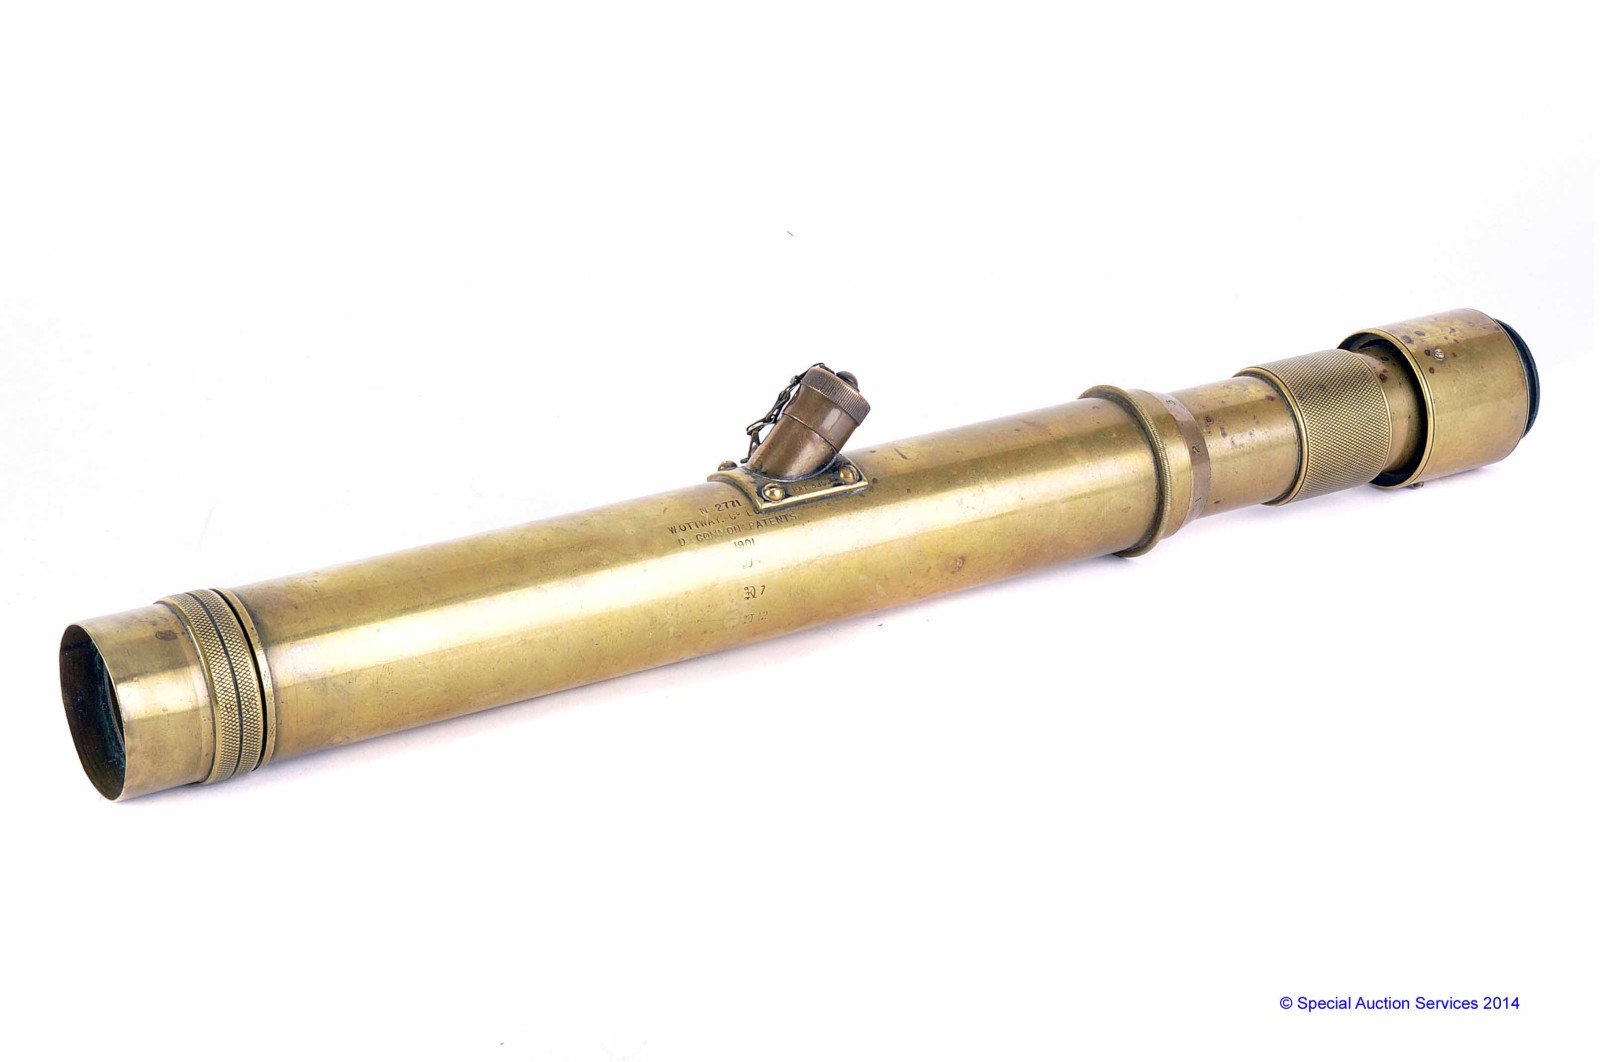 A W.Ottway & Co. Brass Scope, serial no. 2771, with three assay calibration markings, body, G,